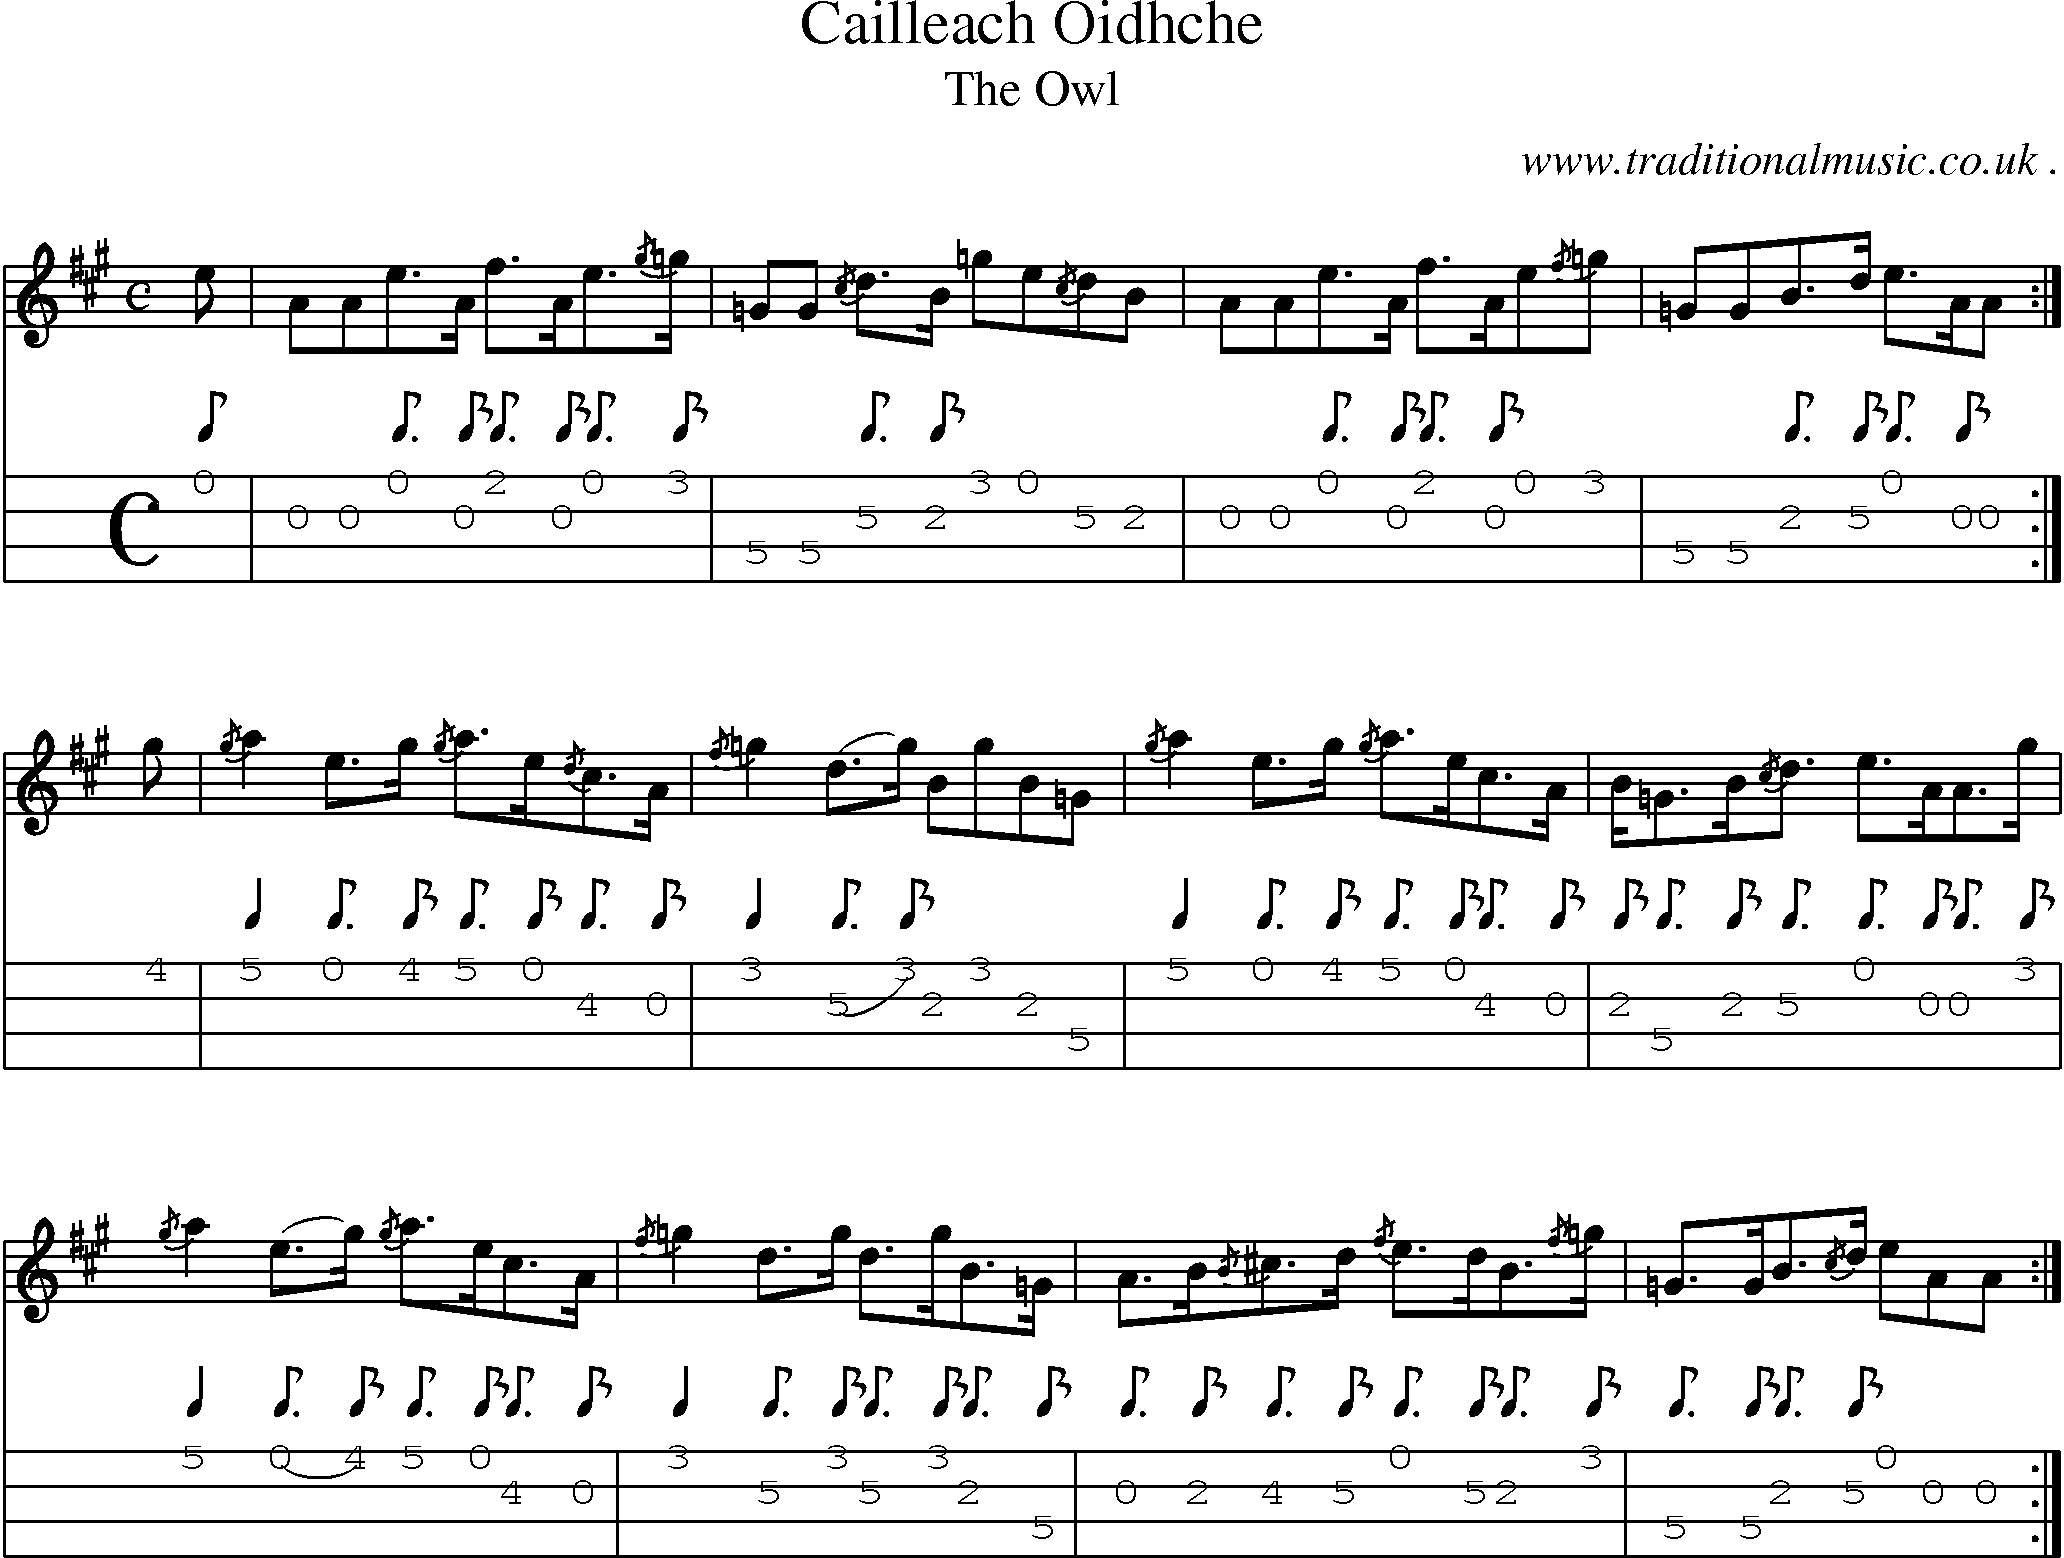 Sheet-music  score, Chords and Mandolin Tabs for Cailleach Oidhche